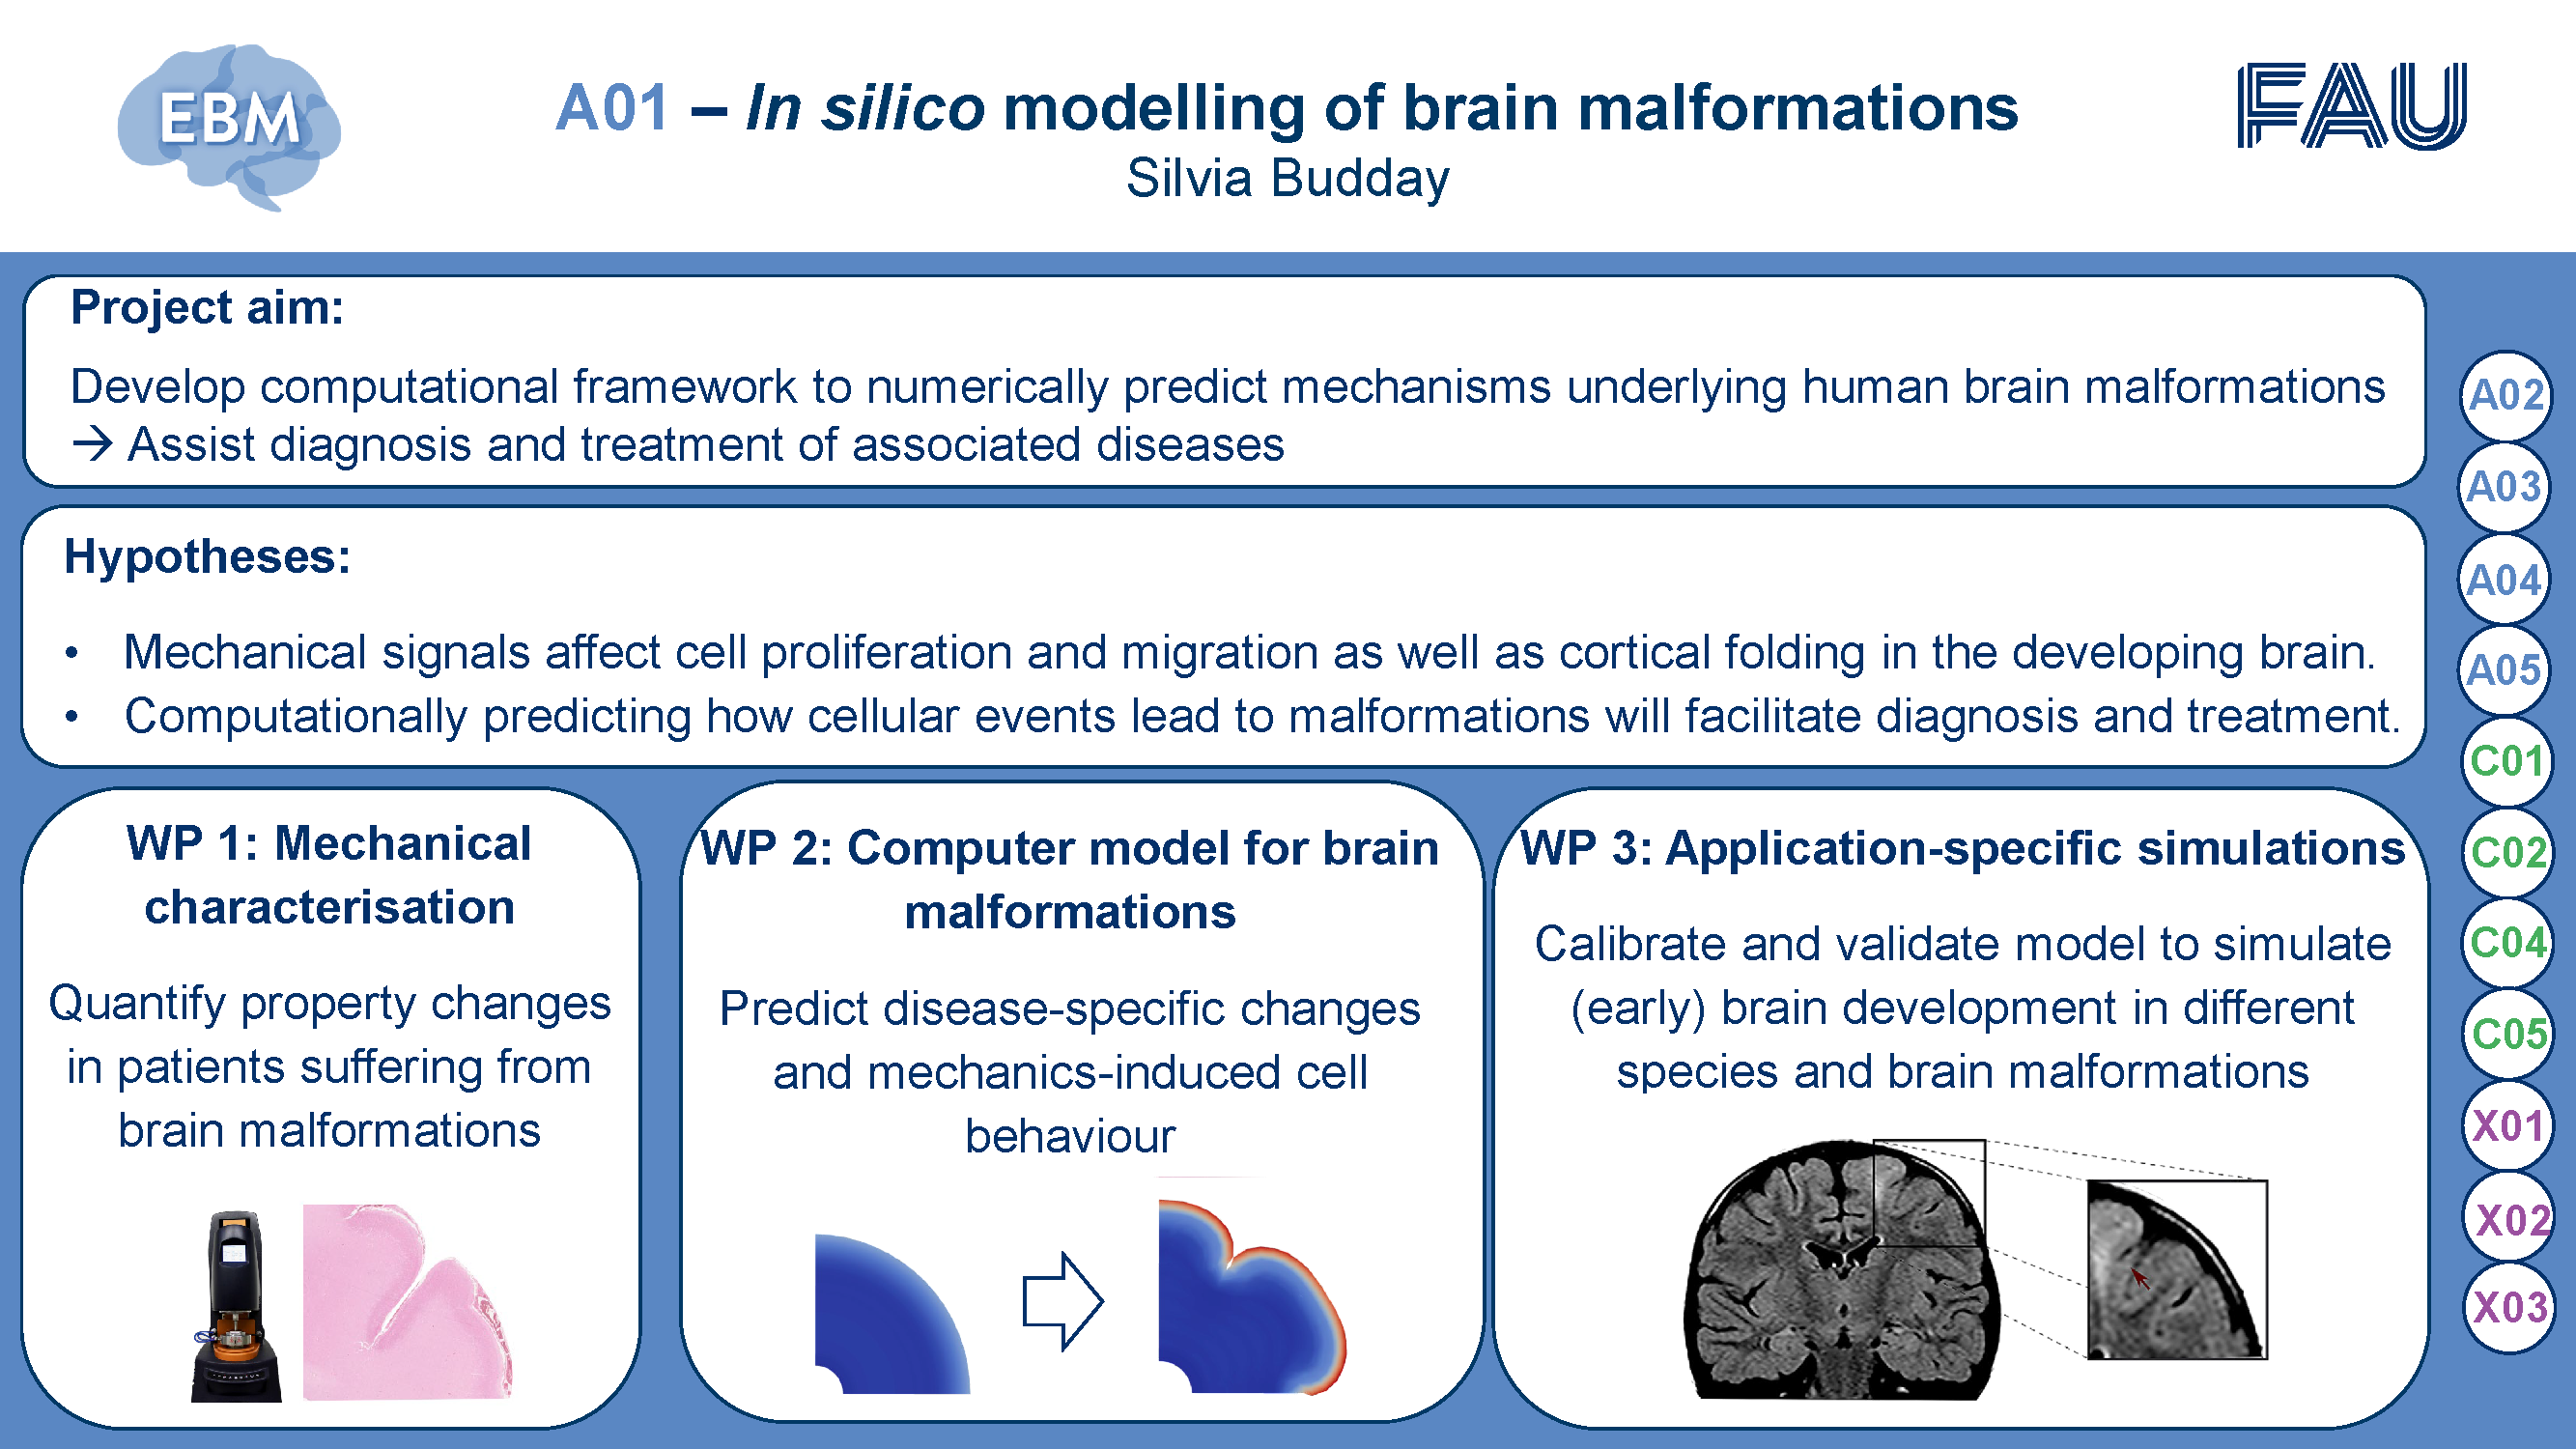 Description of project A01: In silico modelling of brain malformations, PI: Silvia Budday